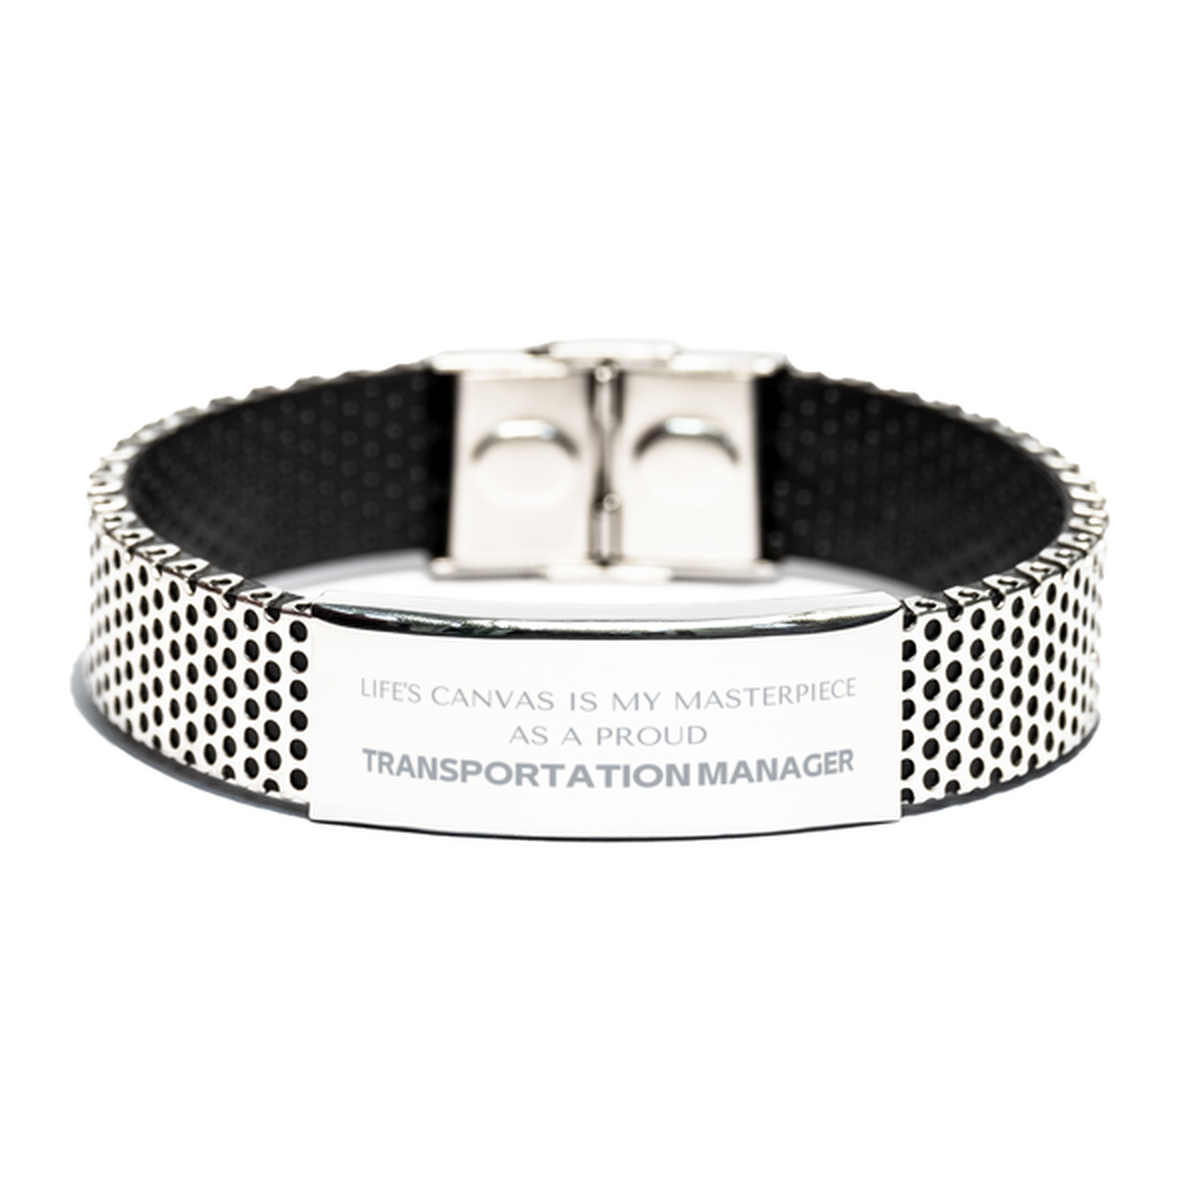 Proud Transportation Manager Gifts, Life's canvas is my masterpiece, Epic Birthday Christmas Unique Stainless Steel Bracelet For Transportation Manager, Coworkers, Men, Women, Friends